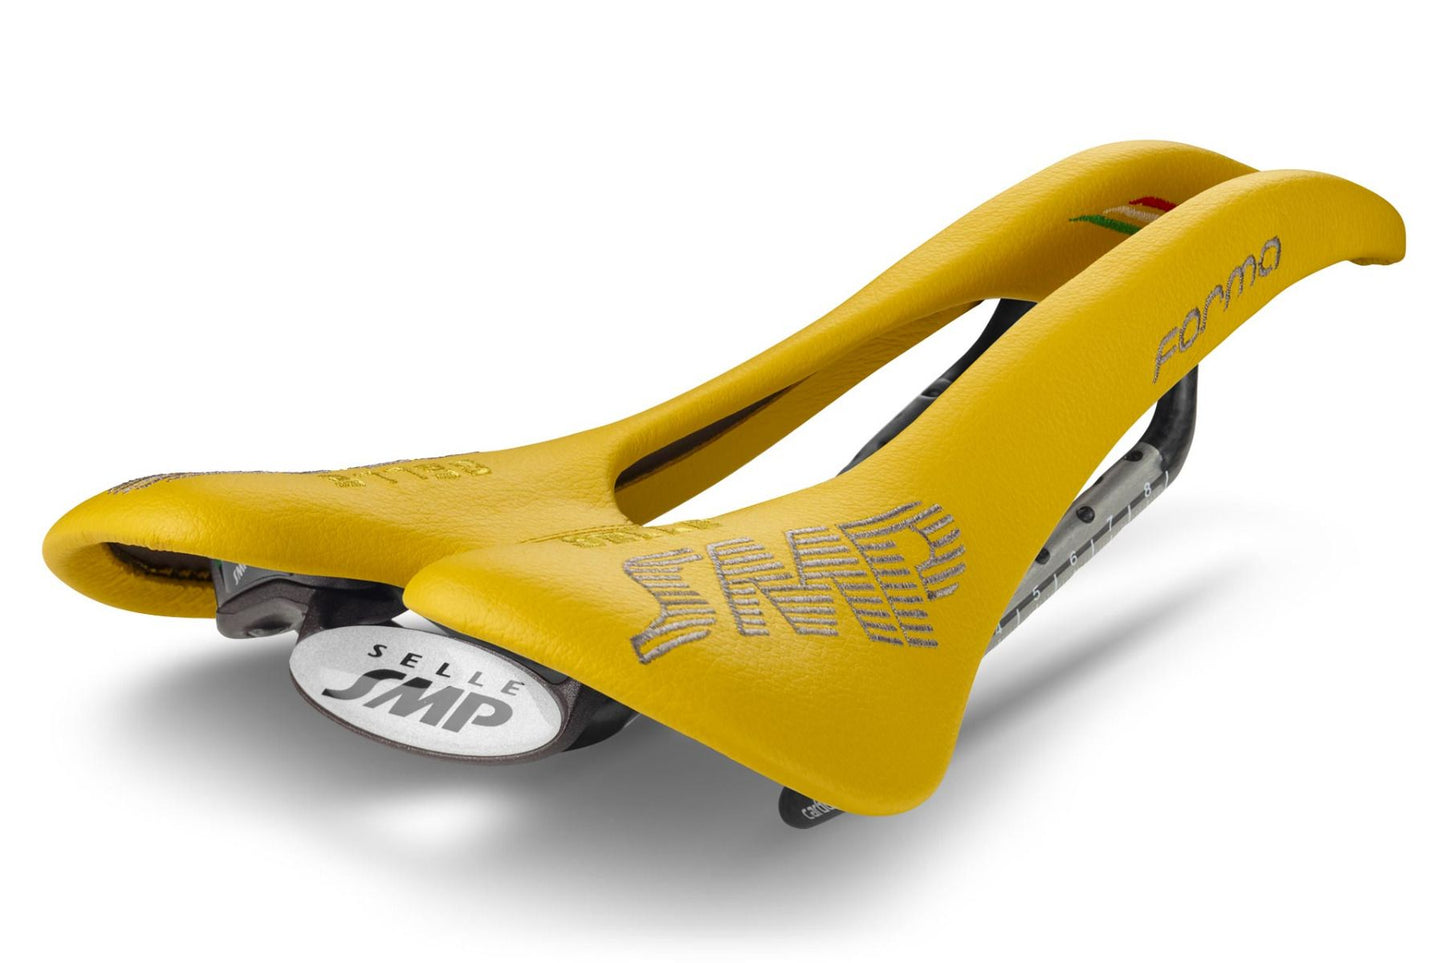 Selle SMP Forma Saddle with Carbon Rails (Yellow)